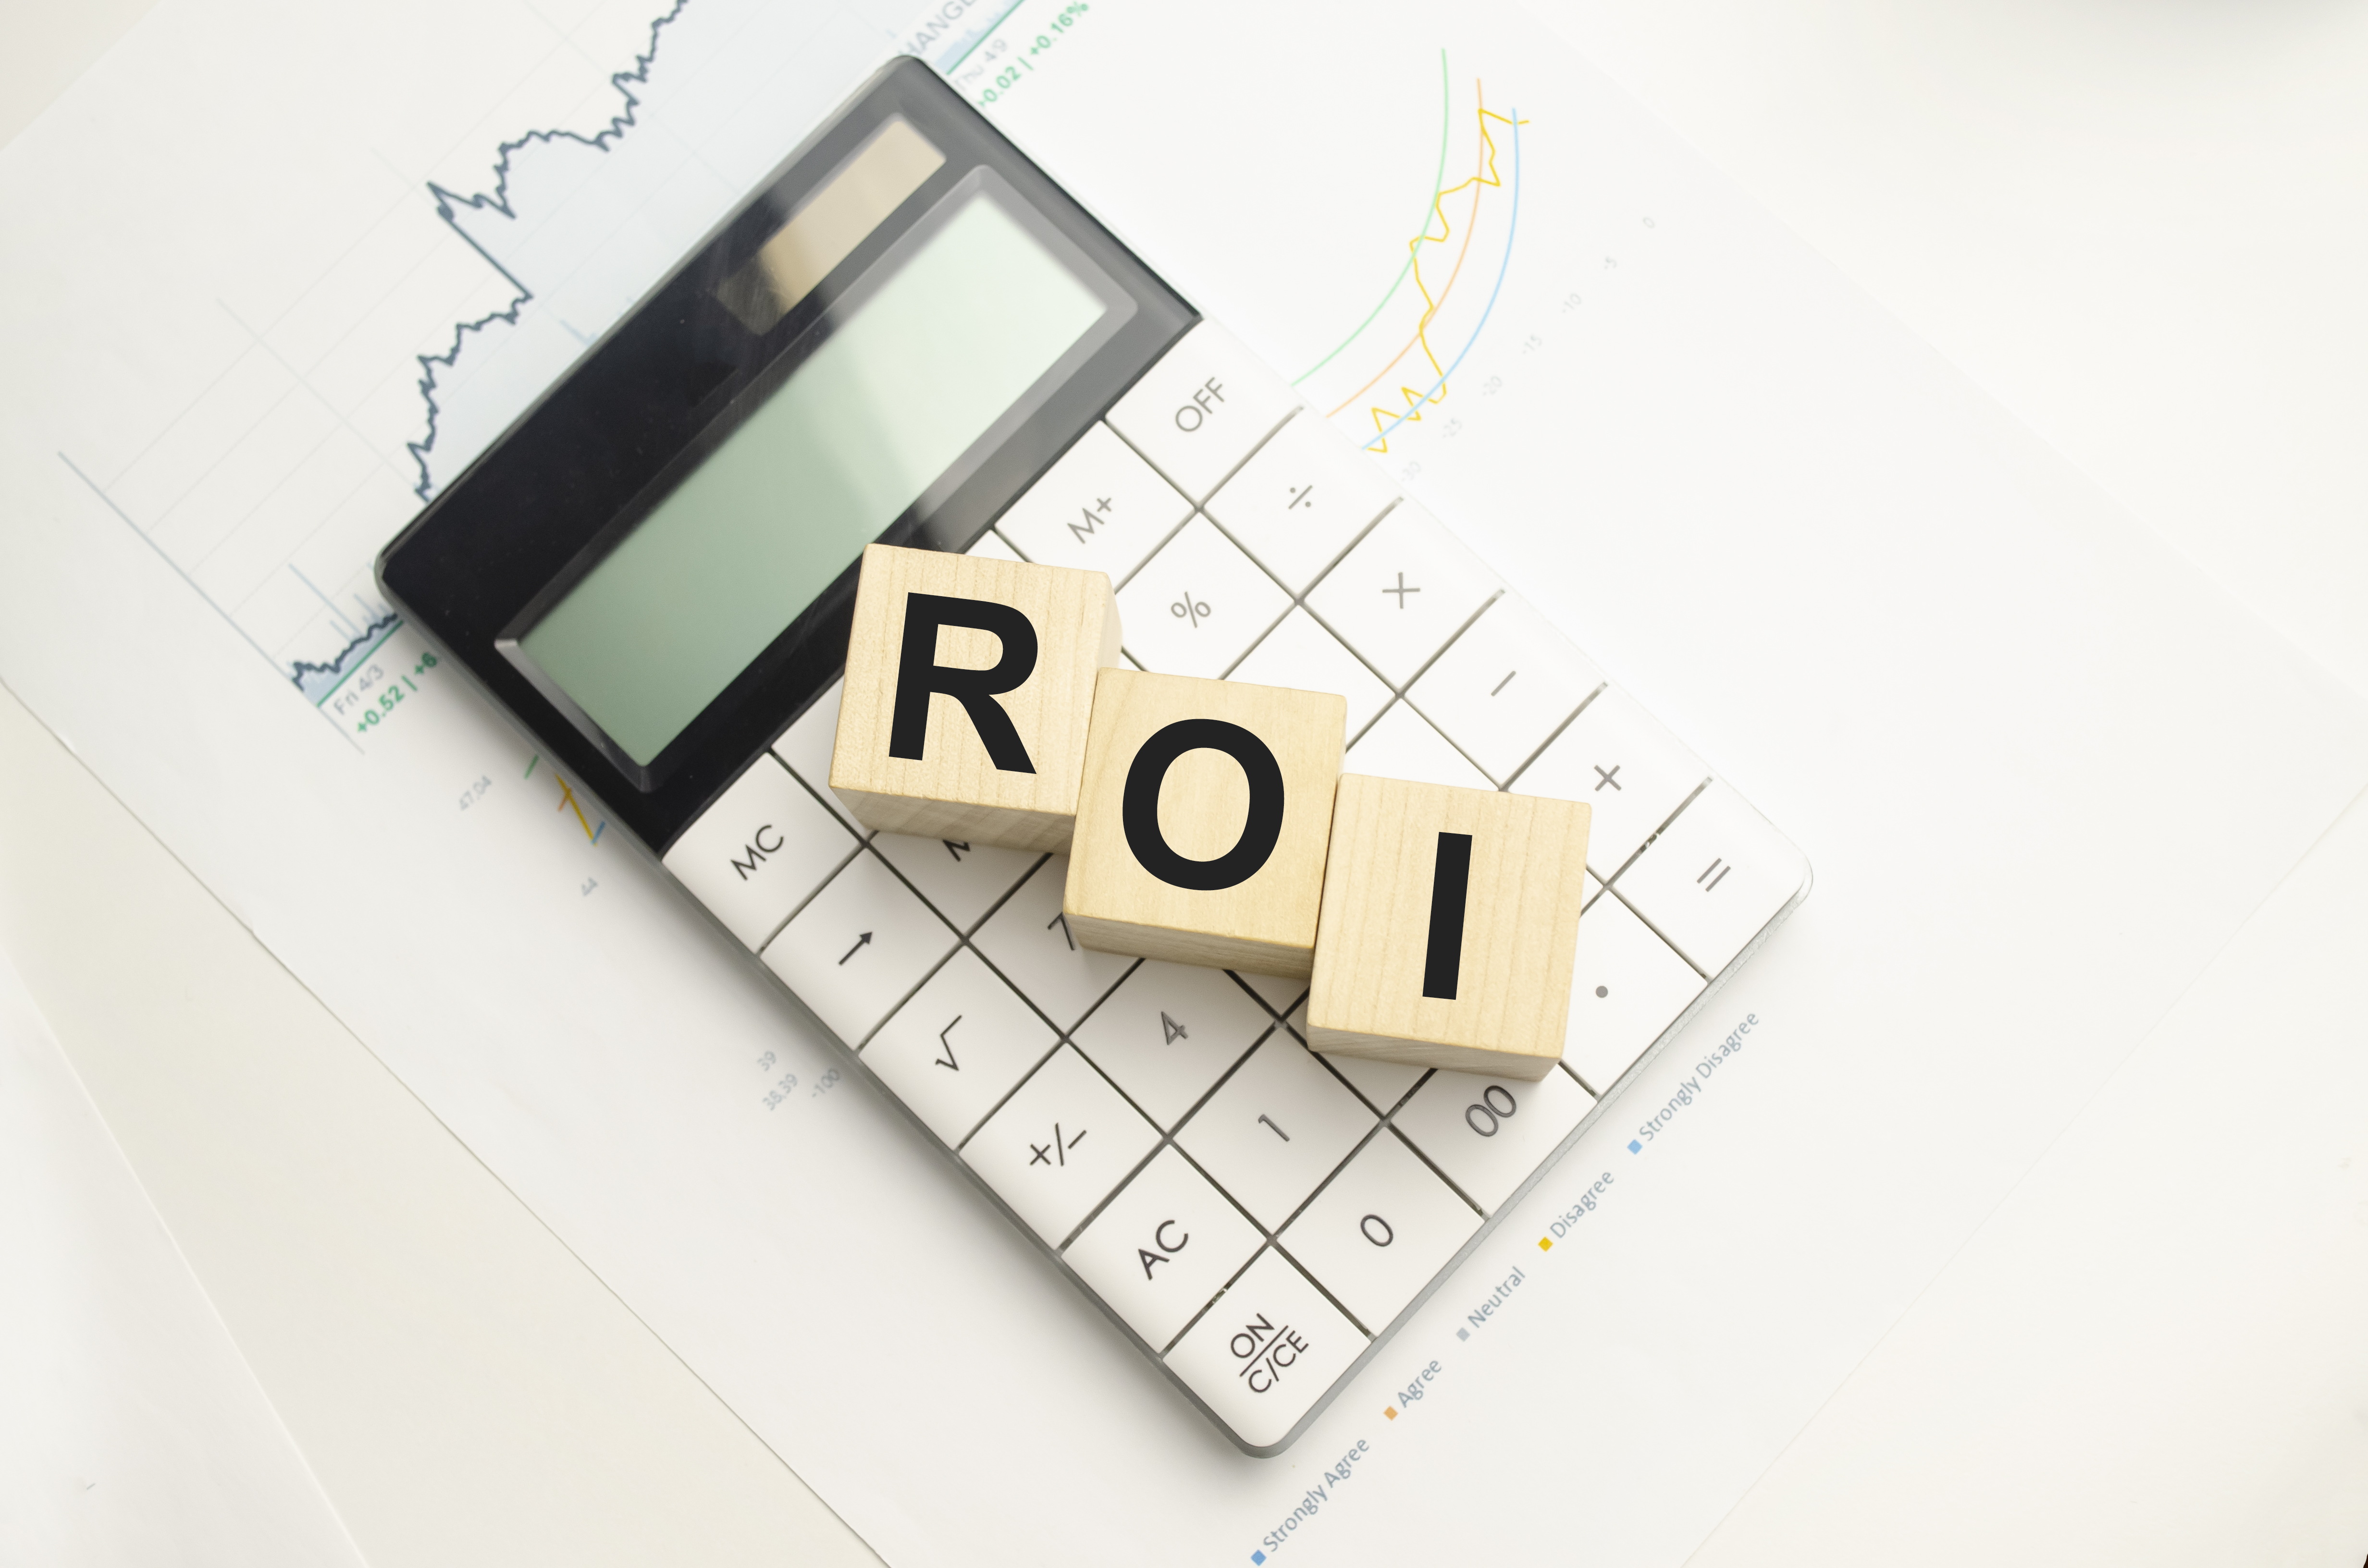 roi-return-investment-written-wooden-cubes-calculator-pen-light-background-investment-concept-high-quality-photo